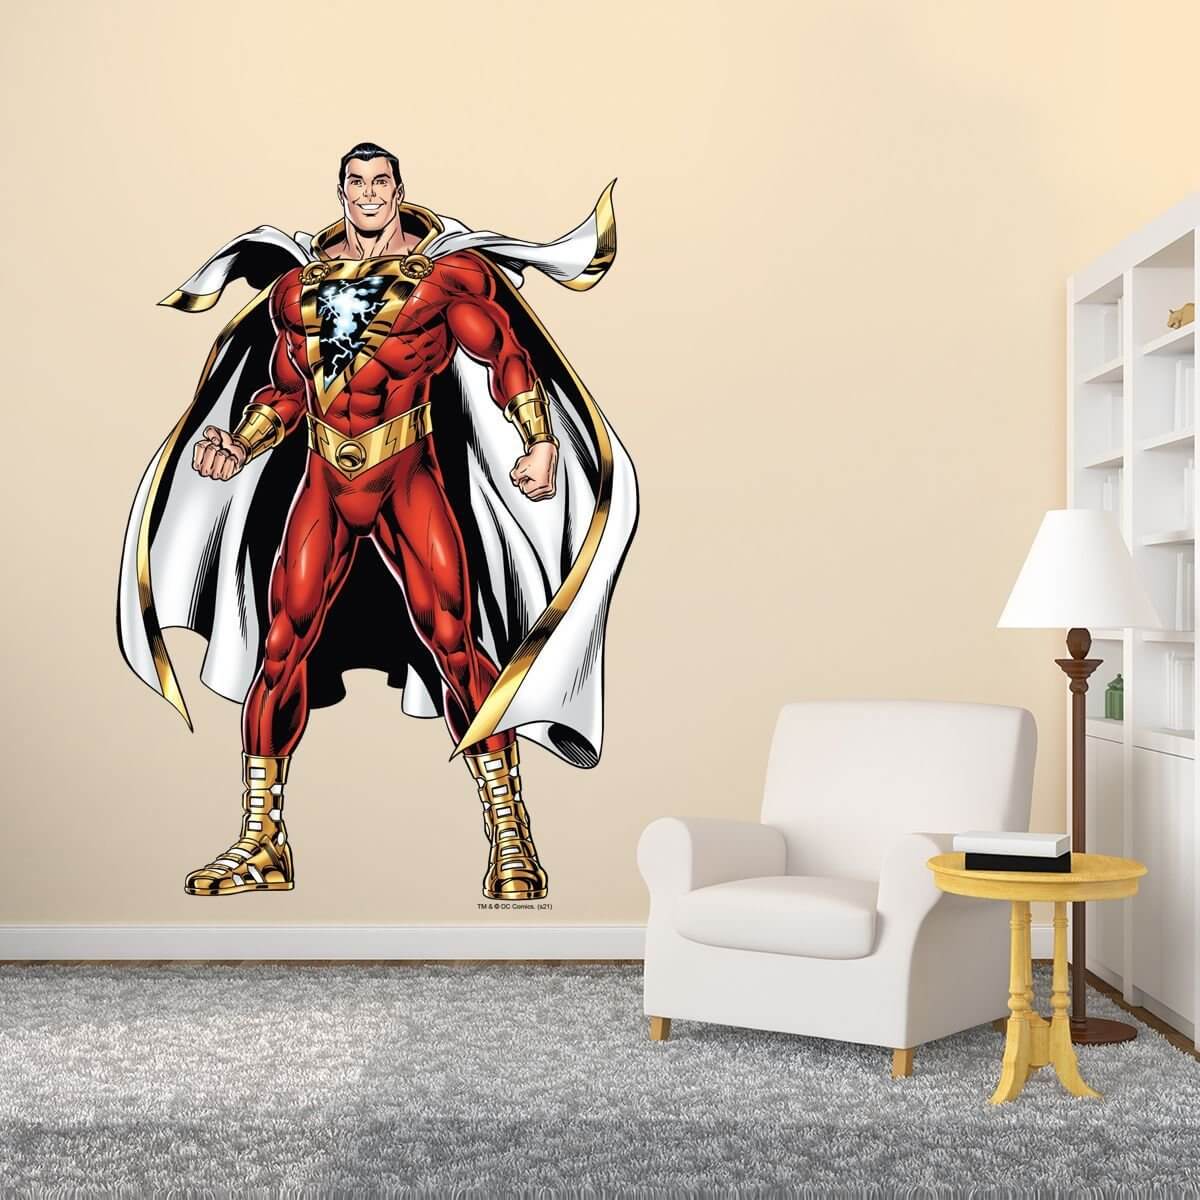 Kismet Decals Shazam! Earth's Hero Licensed Wall Sticker - Easy DIY Justice League Home & Room Decor Wall Art - Kismet Decals